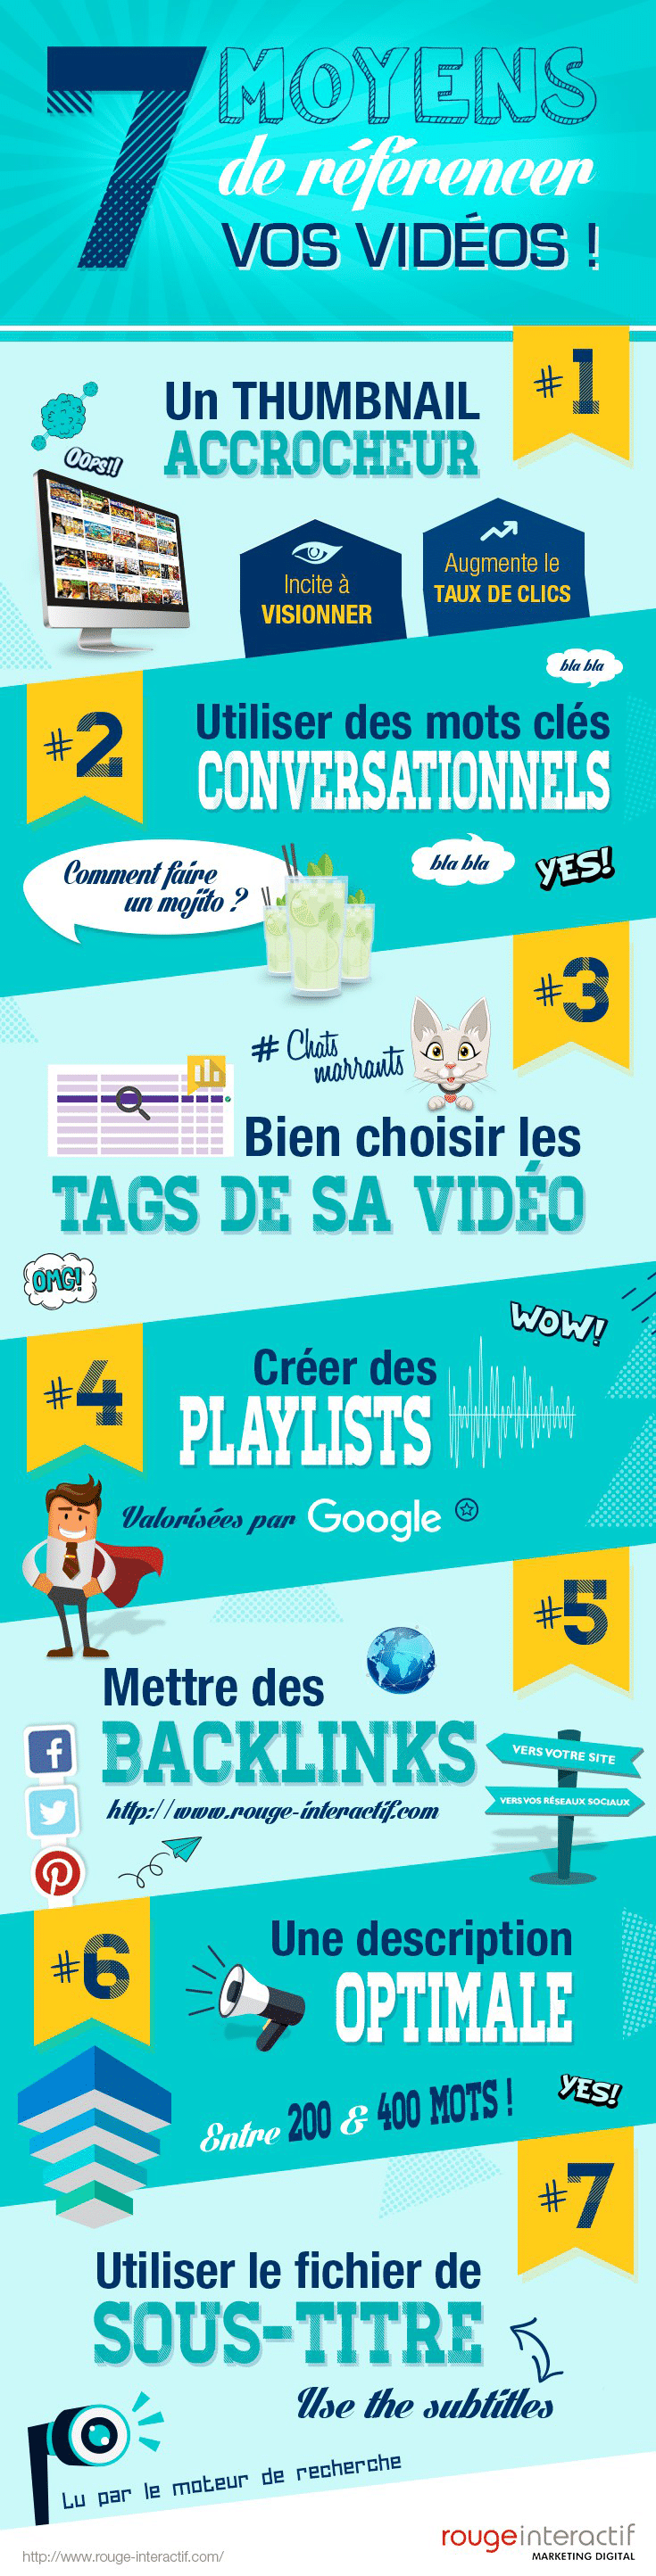 Infographie-referencement-videos